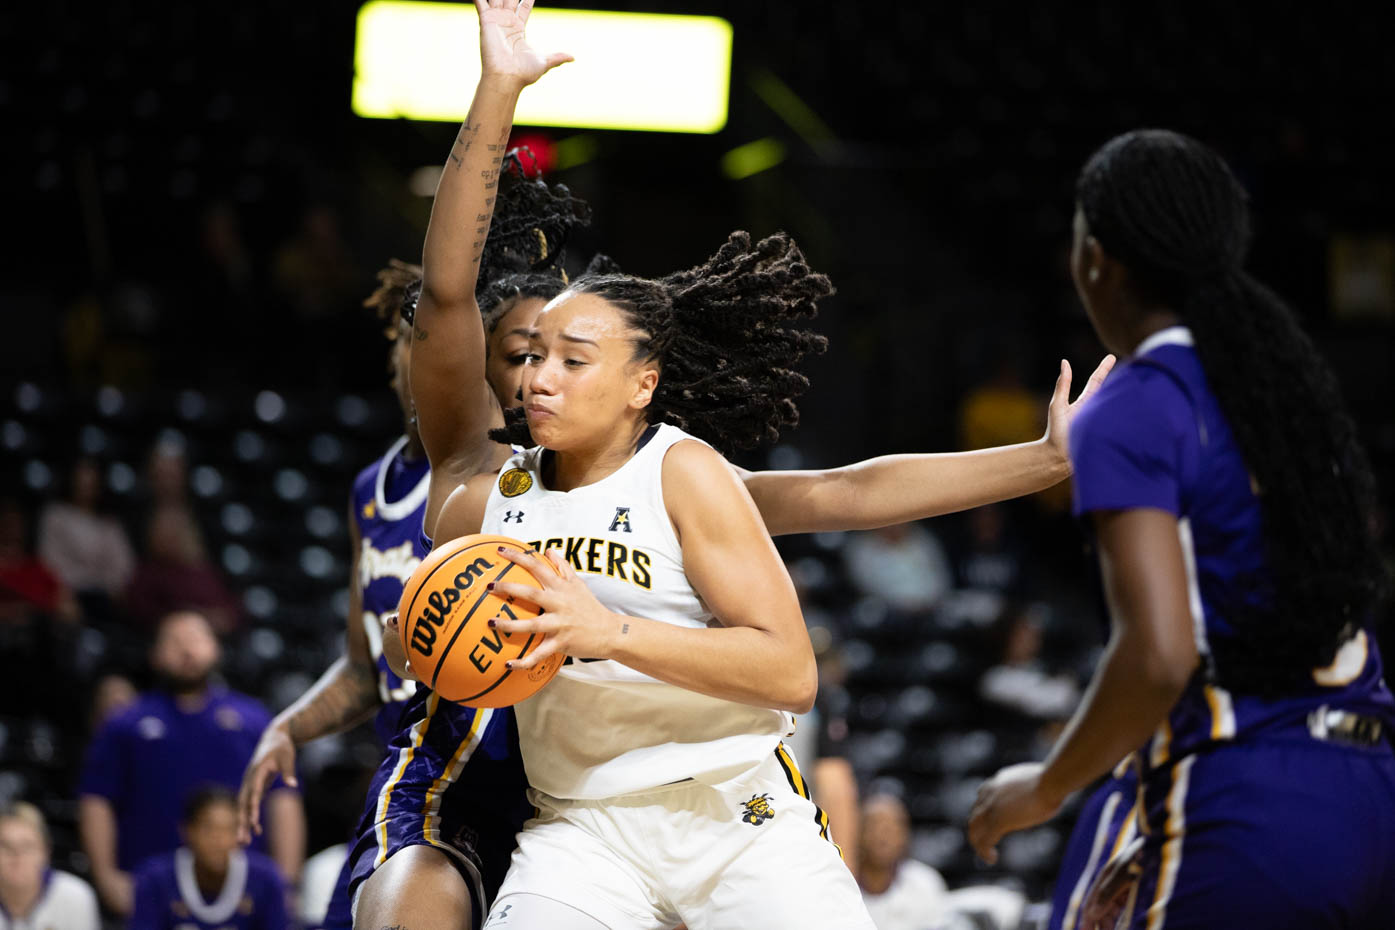 Daniela Abies, a sophomore forward for the Shockers, makes a move in the post against the East Carolina defense. Abies put up six points and eight rebounds in a loss to the Pirates on Feb. 4.